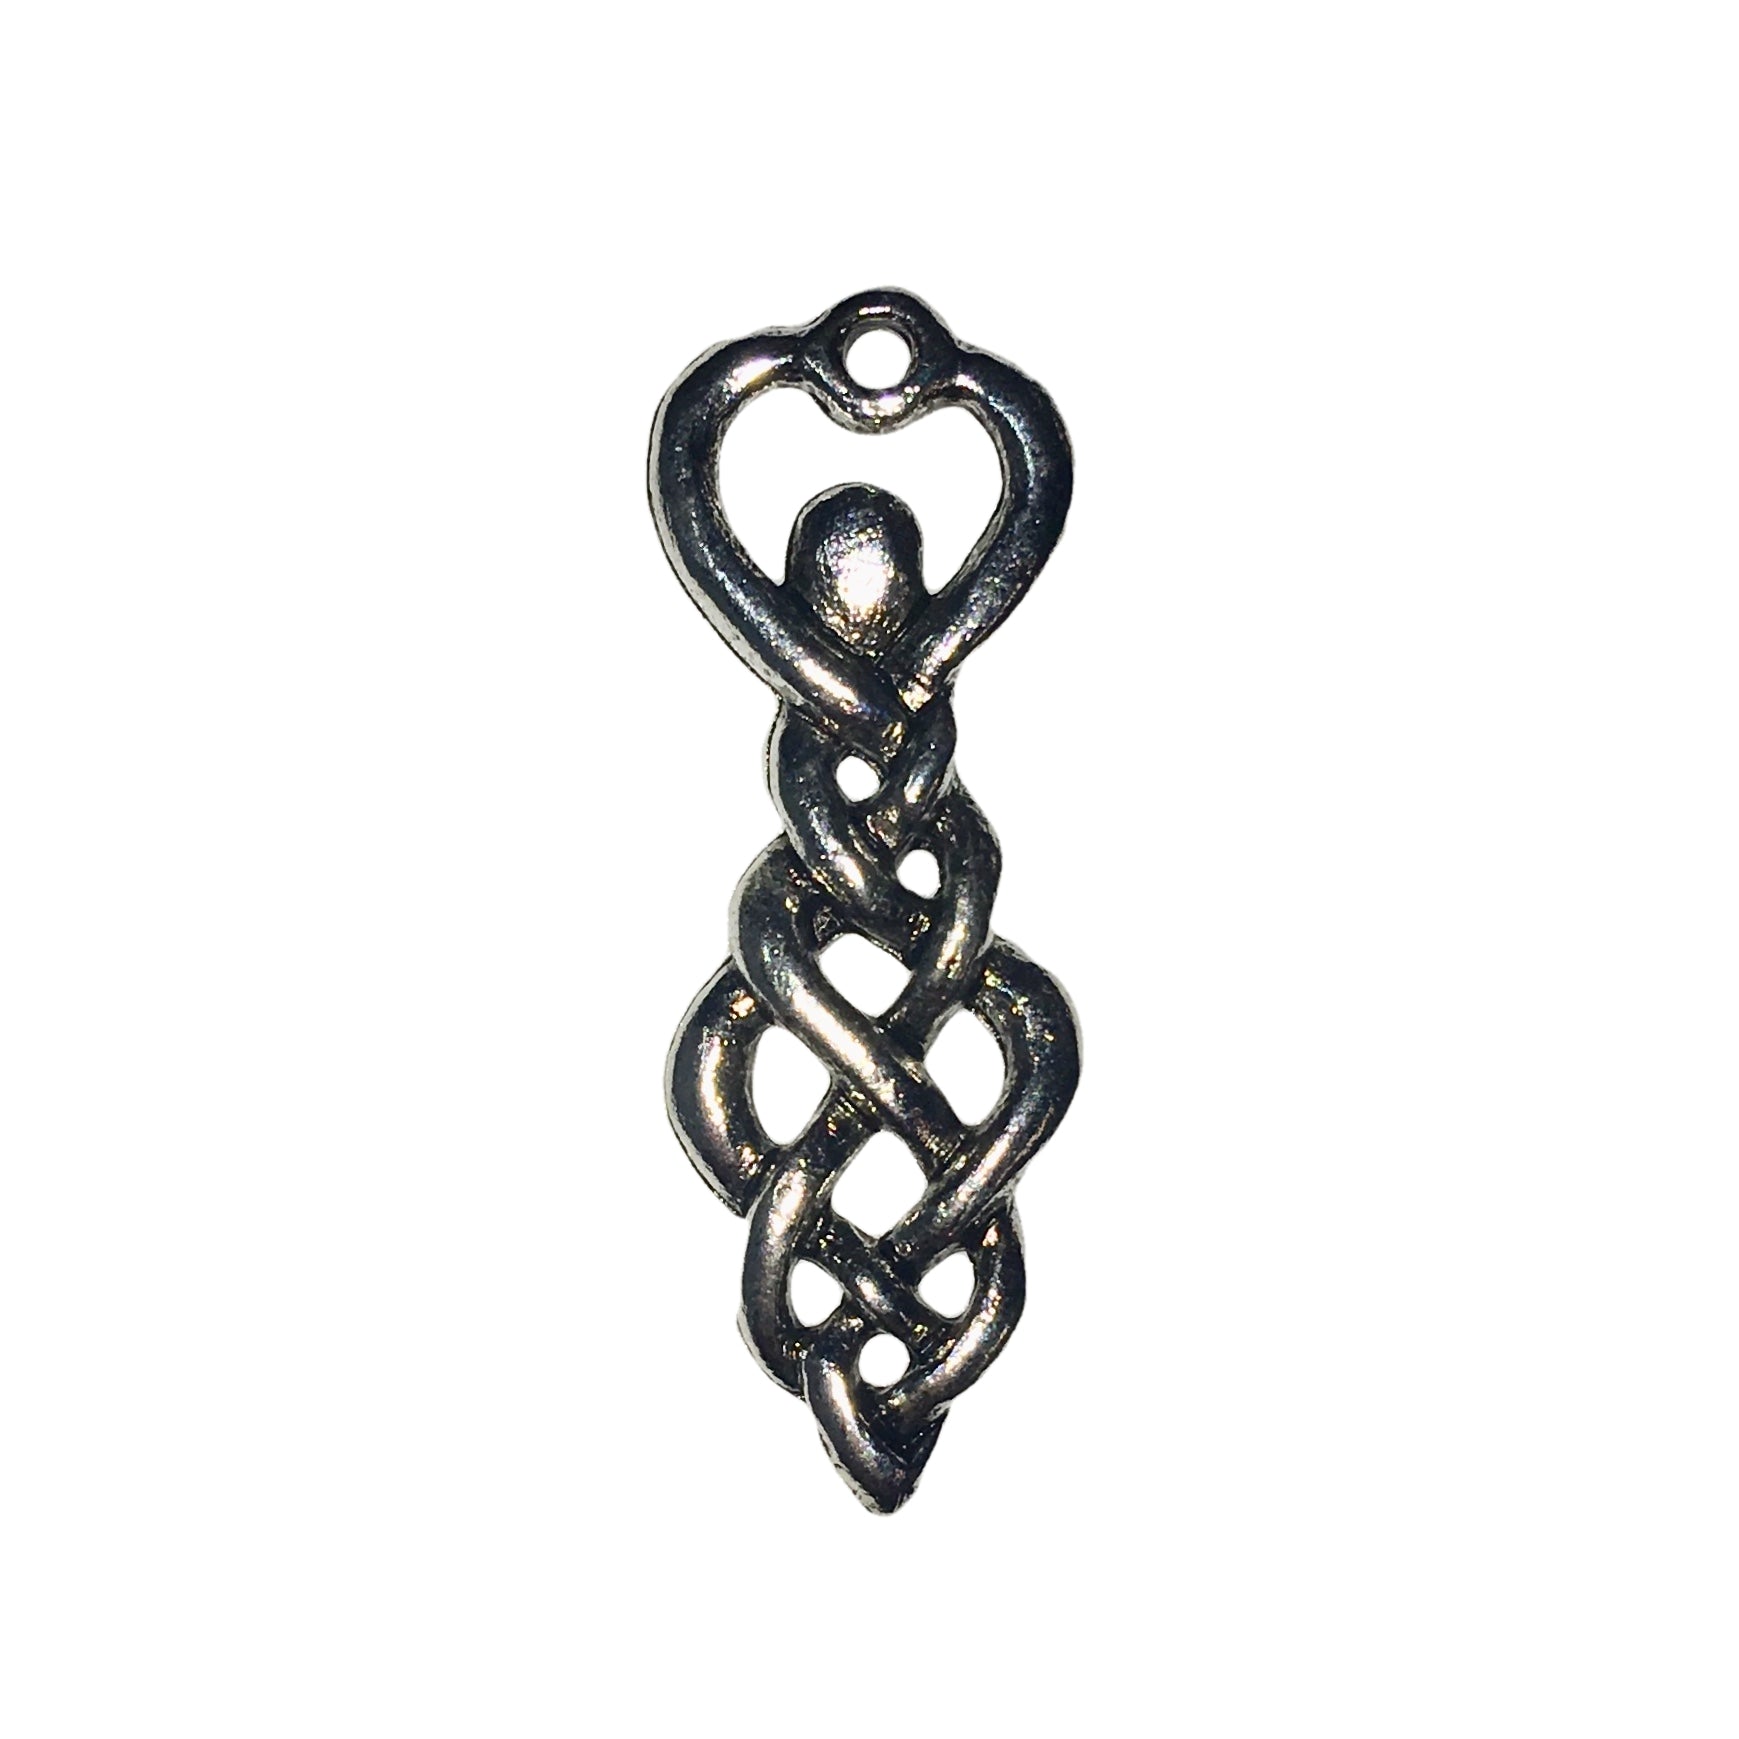 Twisting Goddess Celtic Knot Charms - Qty of 5 Charms - Lead Free Pewter Silver - American Made